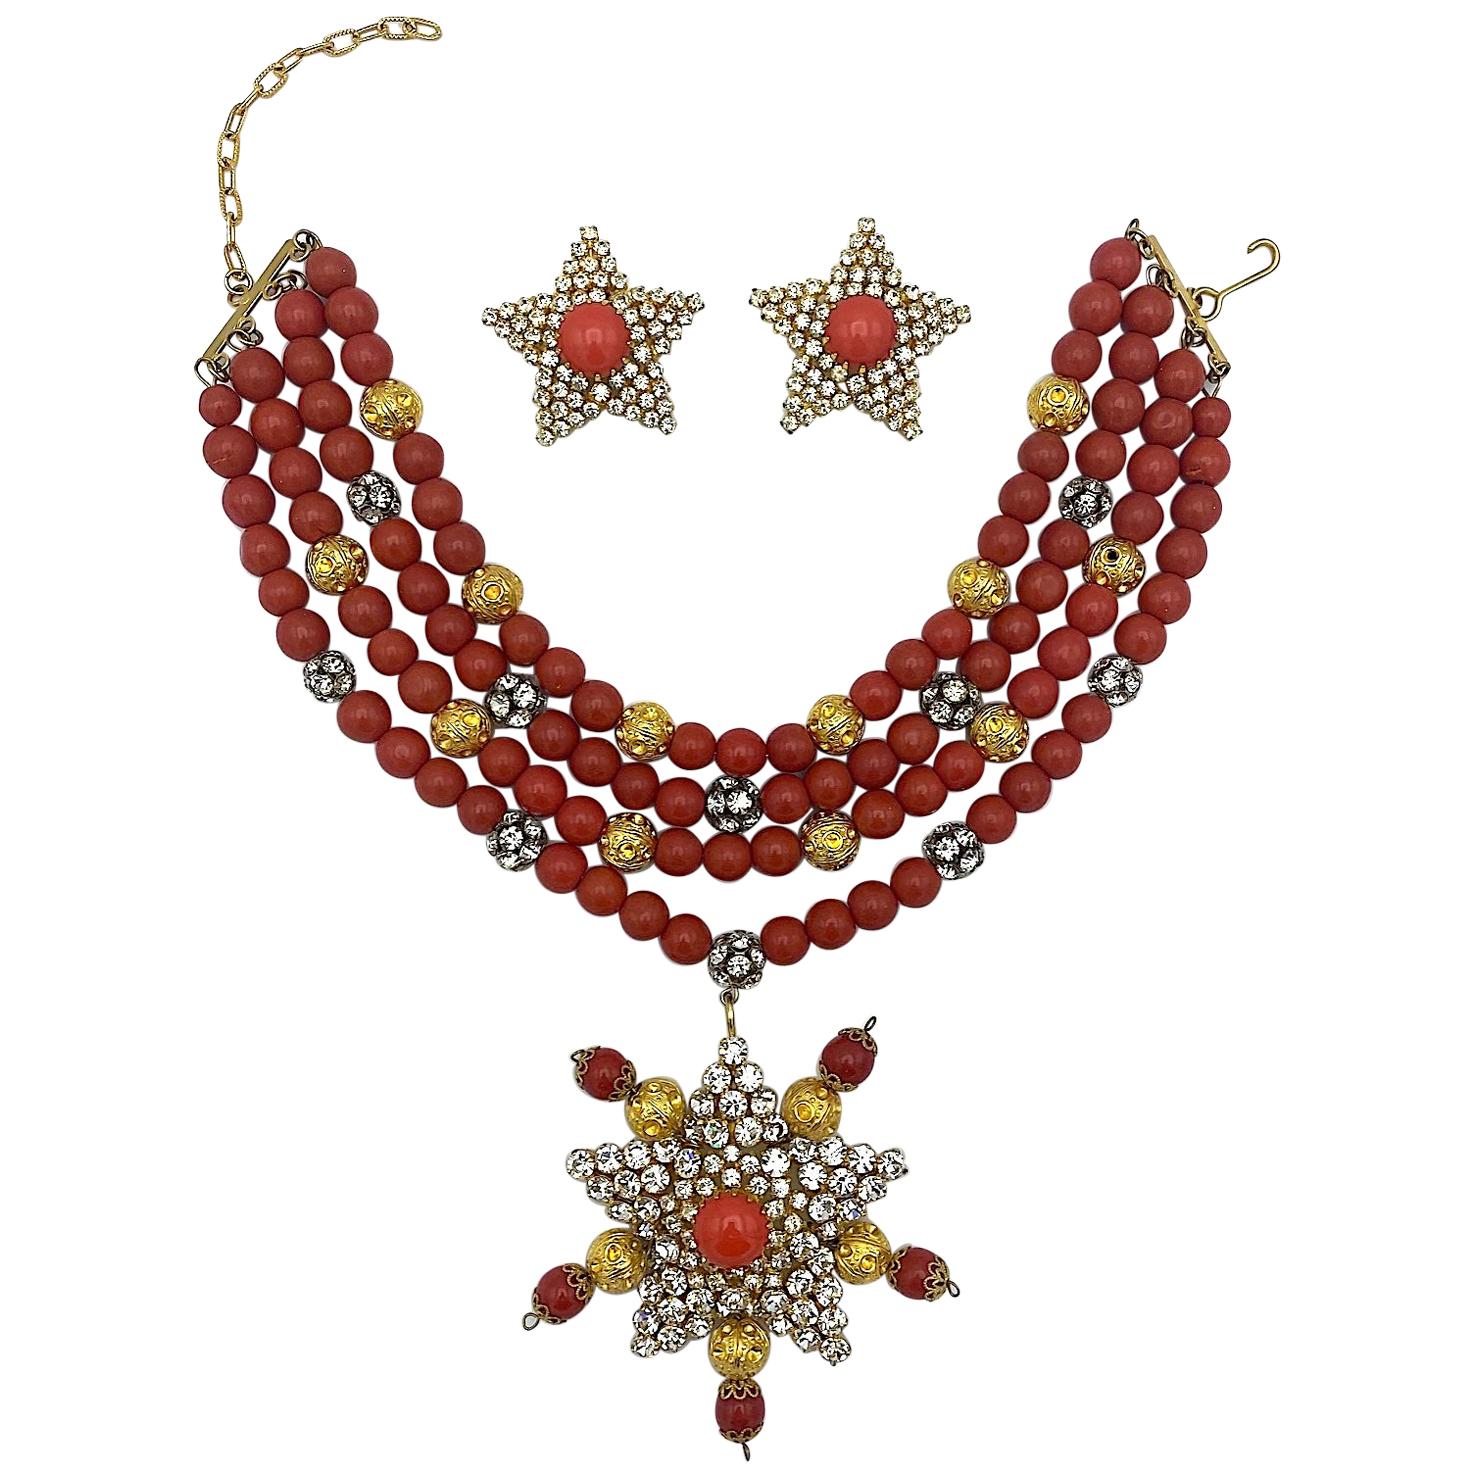 Principessa Helietta Caracciolo Faux Red Coral Choker Necklace and Earrings